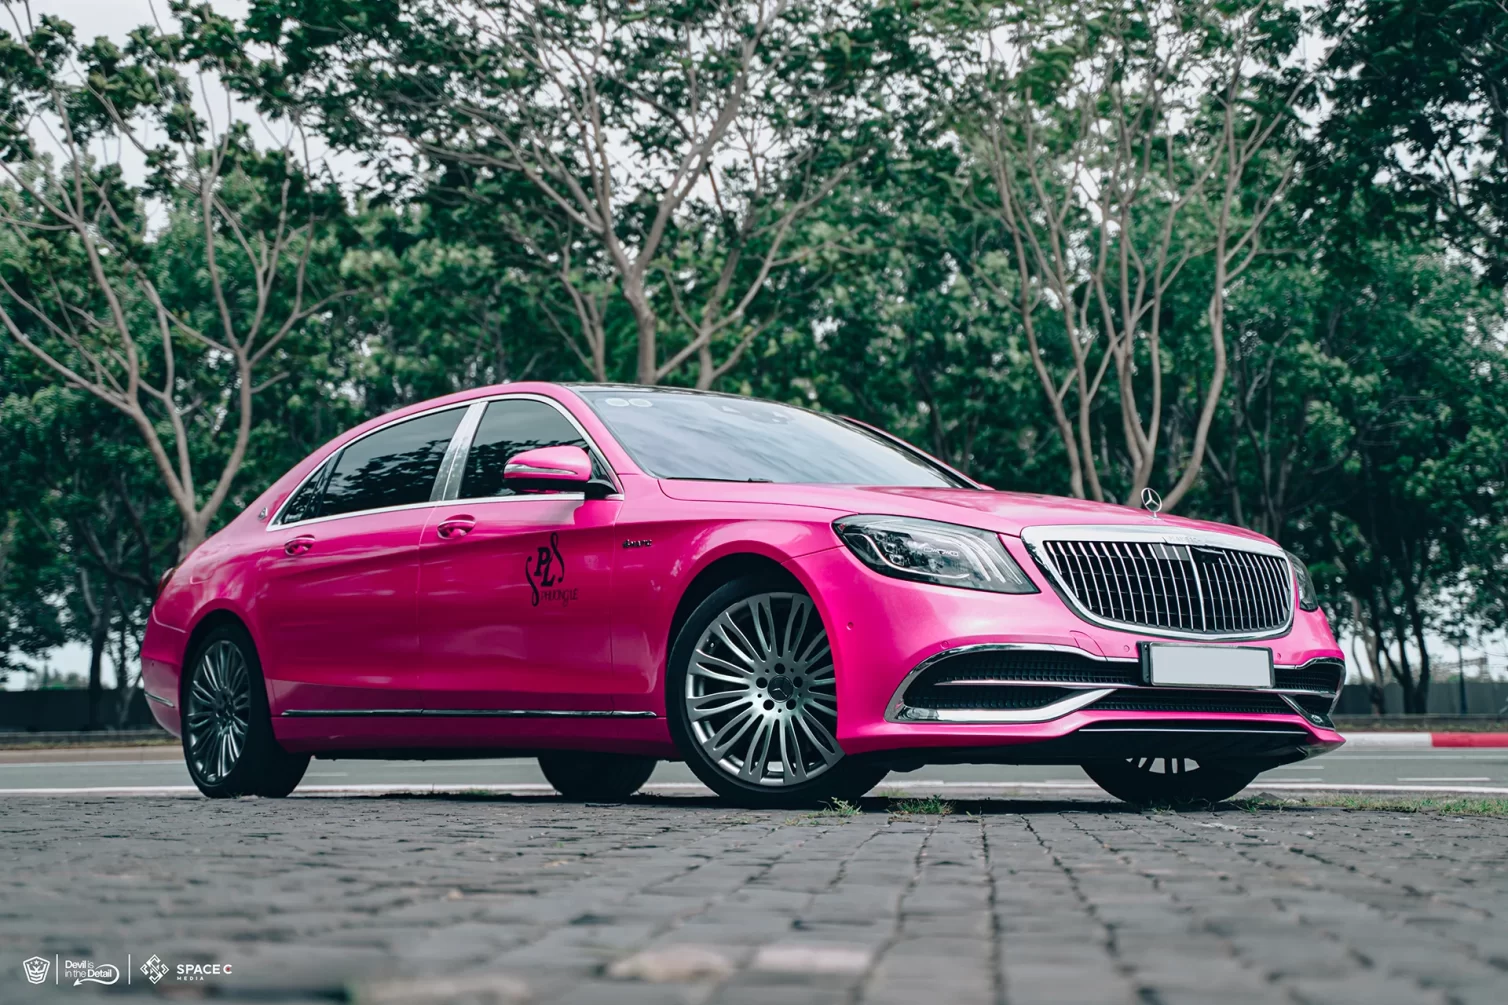 Mercedes-Maybach S450 4MATIC – Gloss Indian Pink